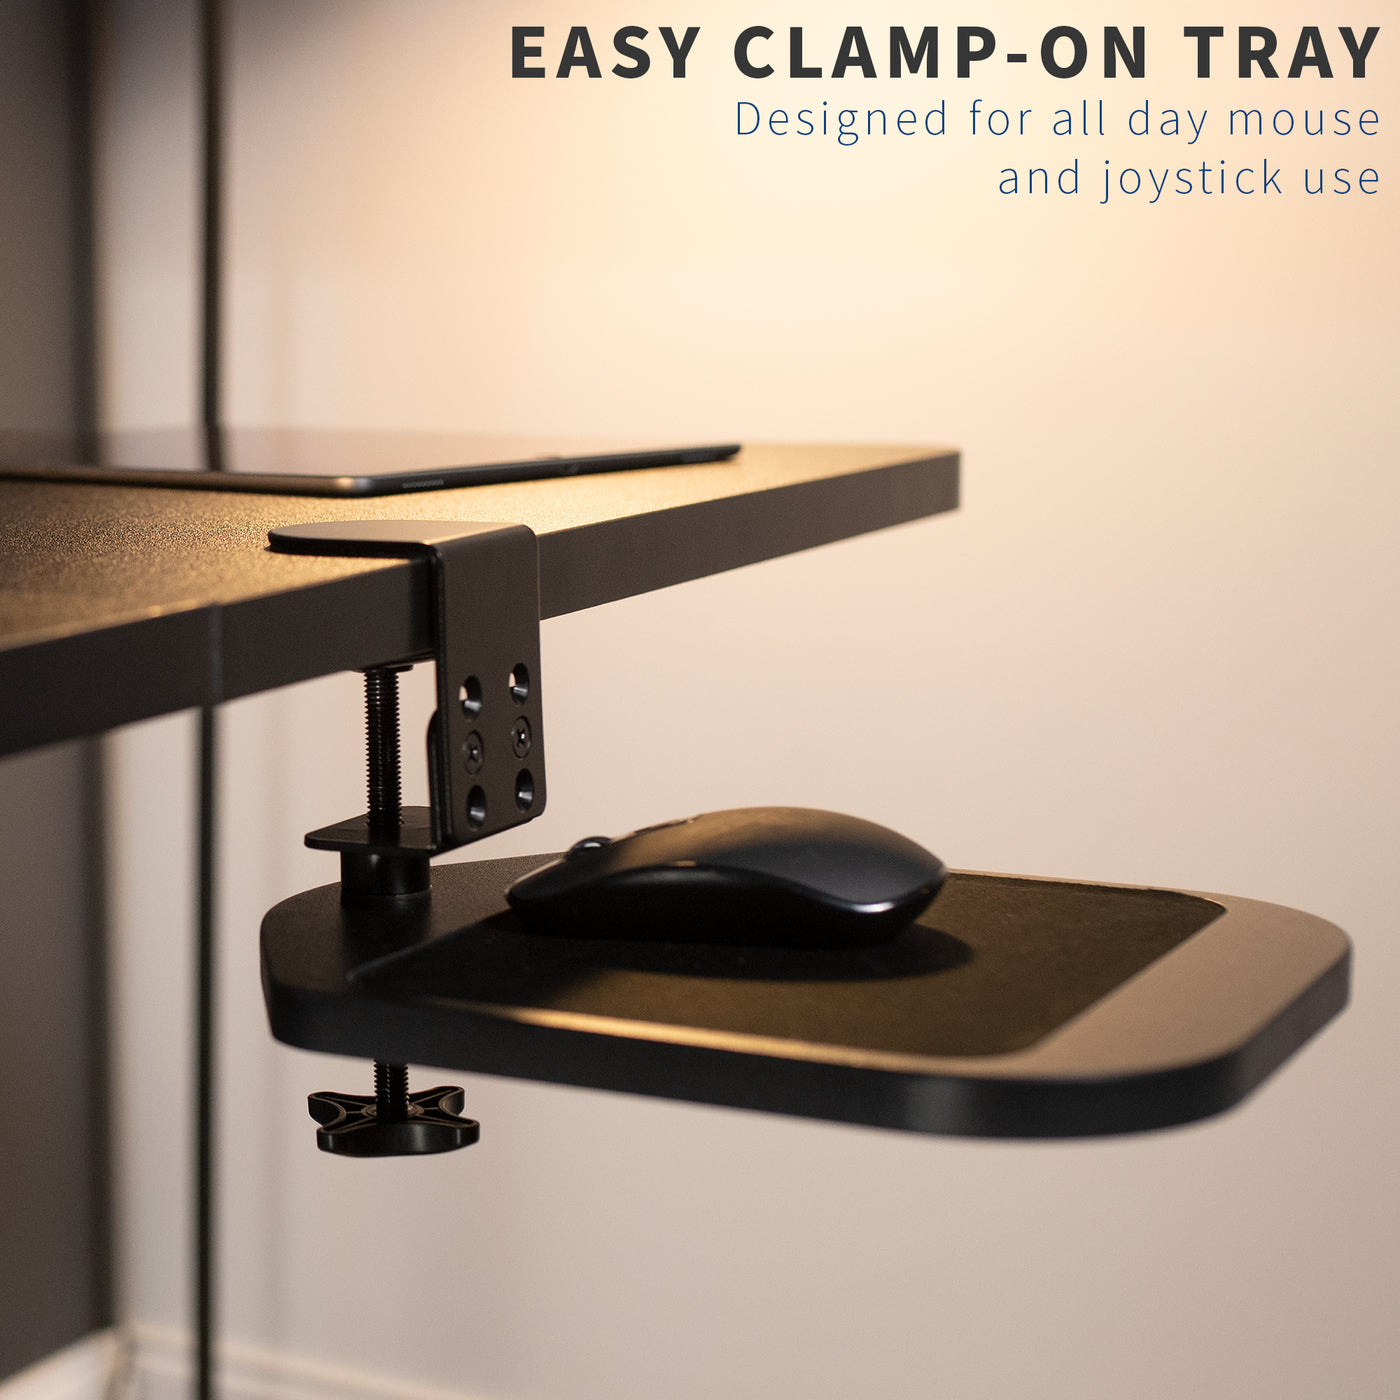 Hassle-free installation with a quick attach clamp-on tray.